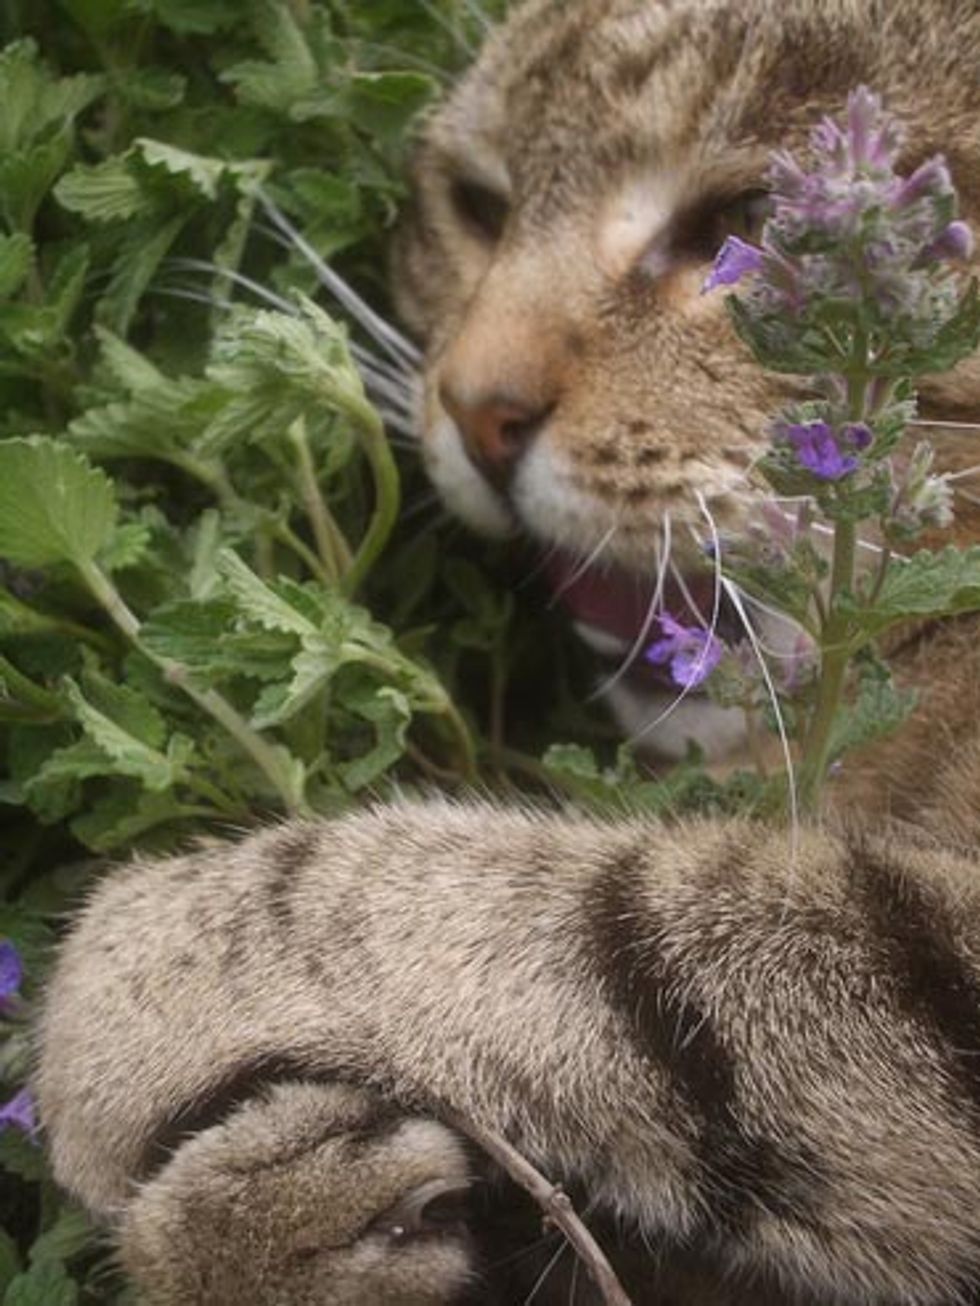 Ask A Vet: What's with Catnip?